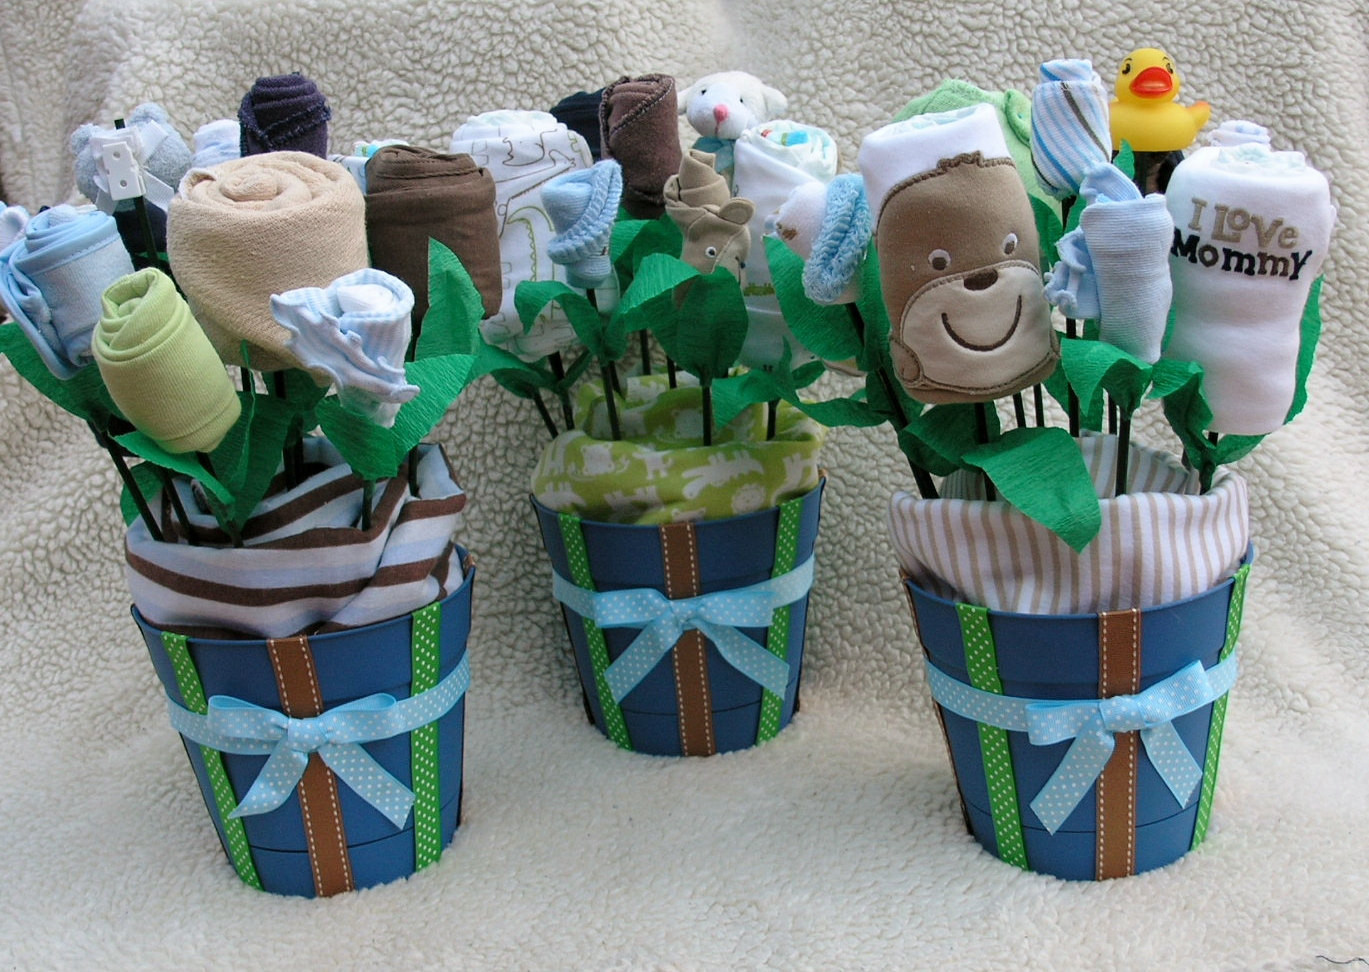 DIY Baby Shower Centerpieces Boy
 Baby Boy Shower Centerpieces for Tables that will be the